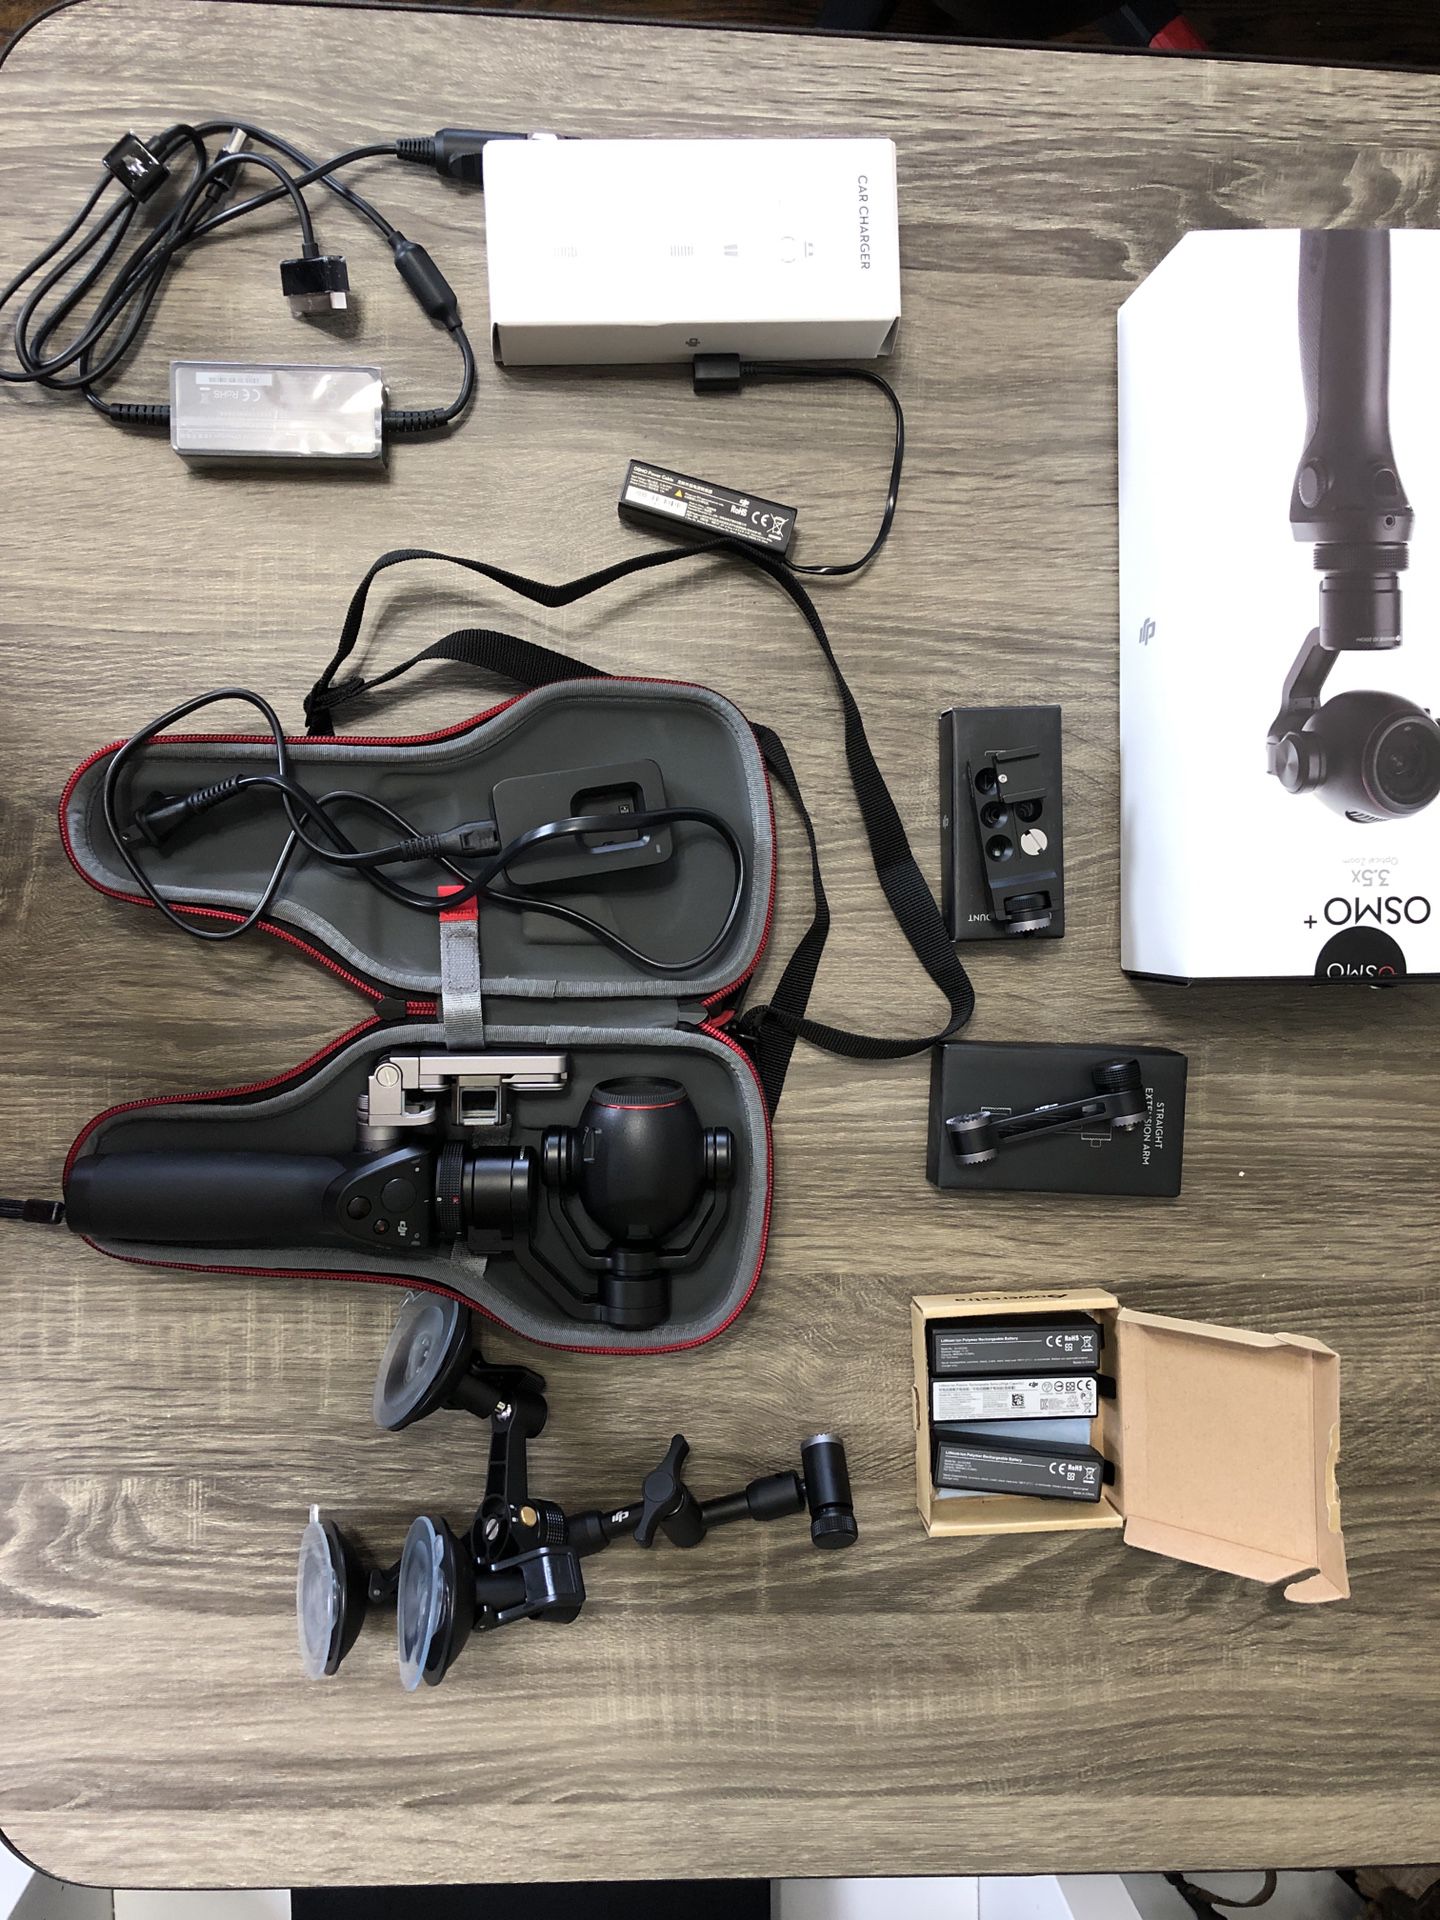 DJI OSMO+ and over $200 in accessories